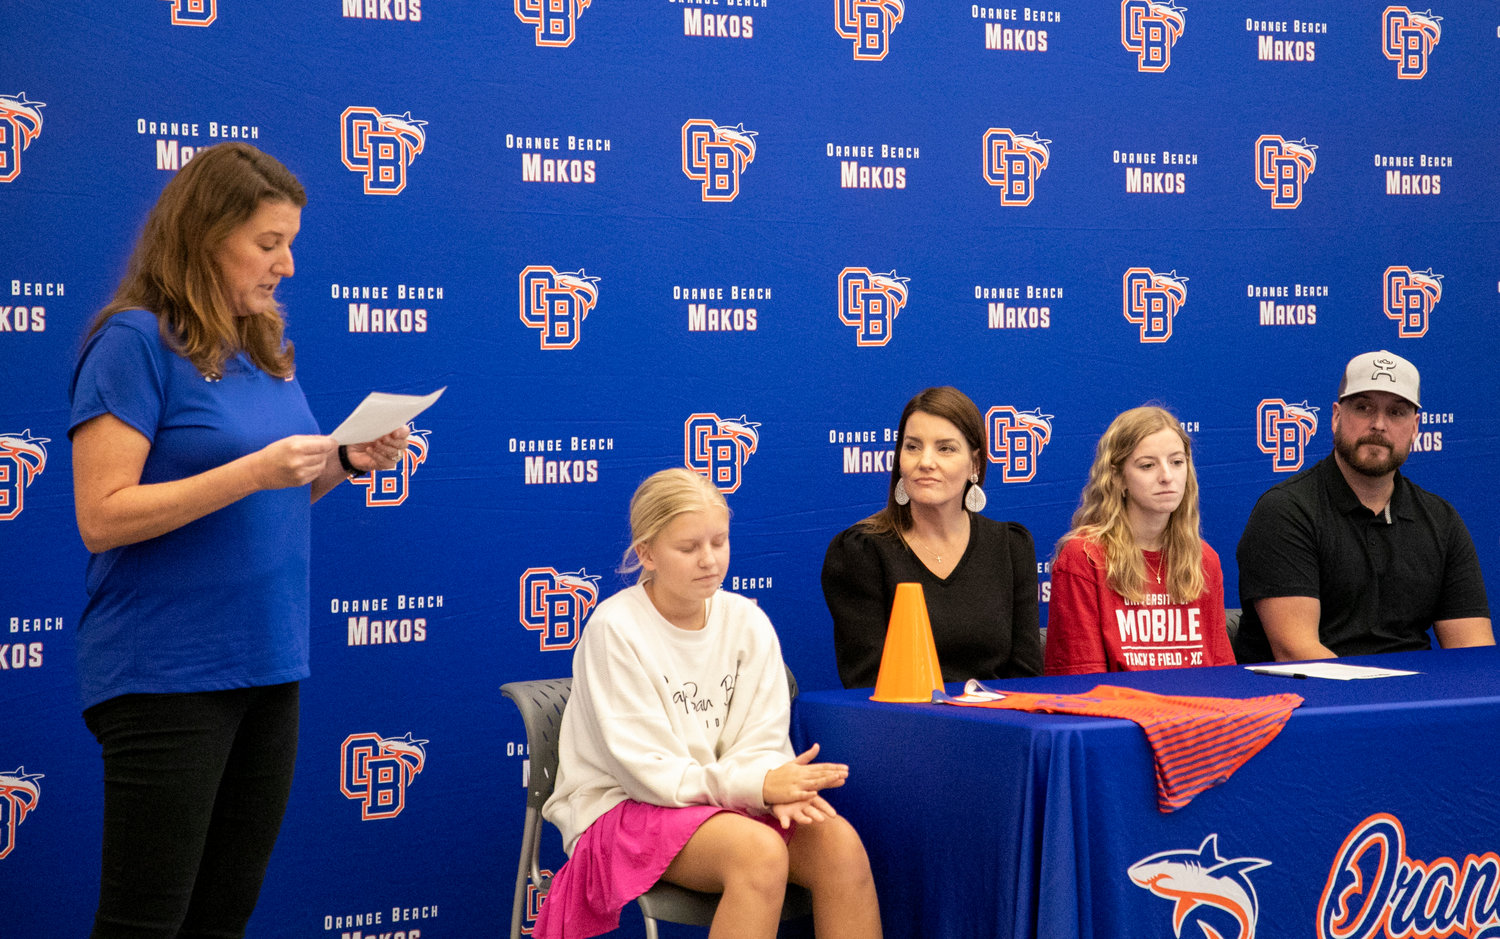 Mako head cross country coach Rachel Ellsworth shared some remarks on Claire Atkins’ decorated running career at Orange Beach High School during Wednesday’s signing ceremony where Atkins marked the first Mako athlete to sign with a college cross country team.